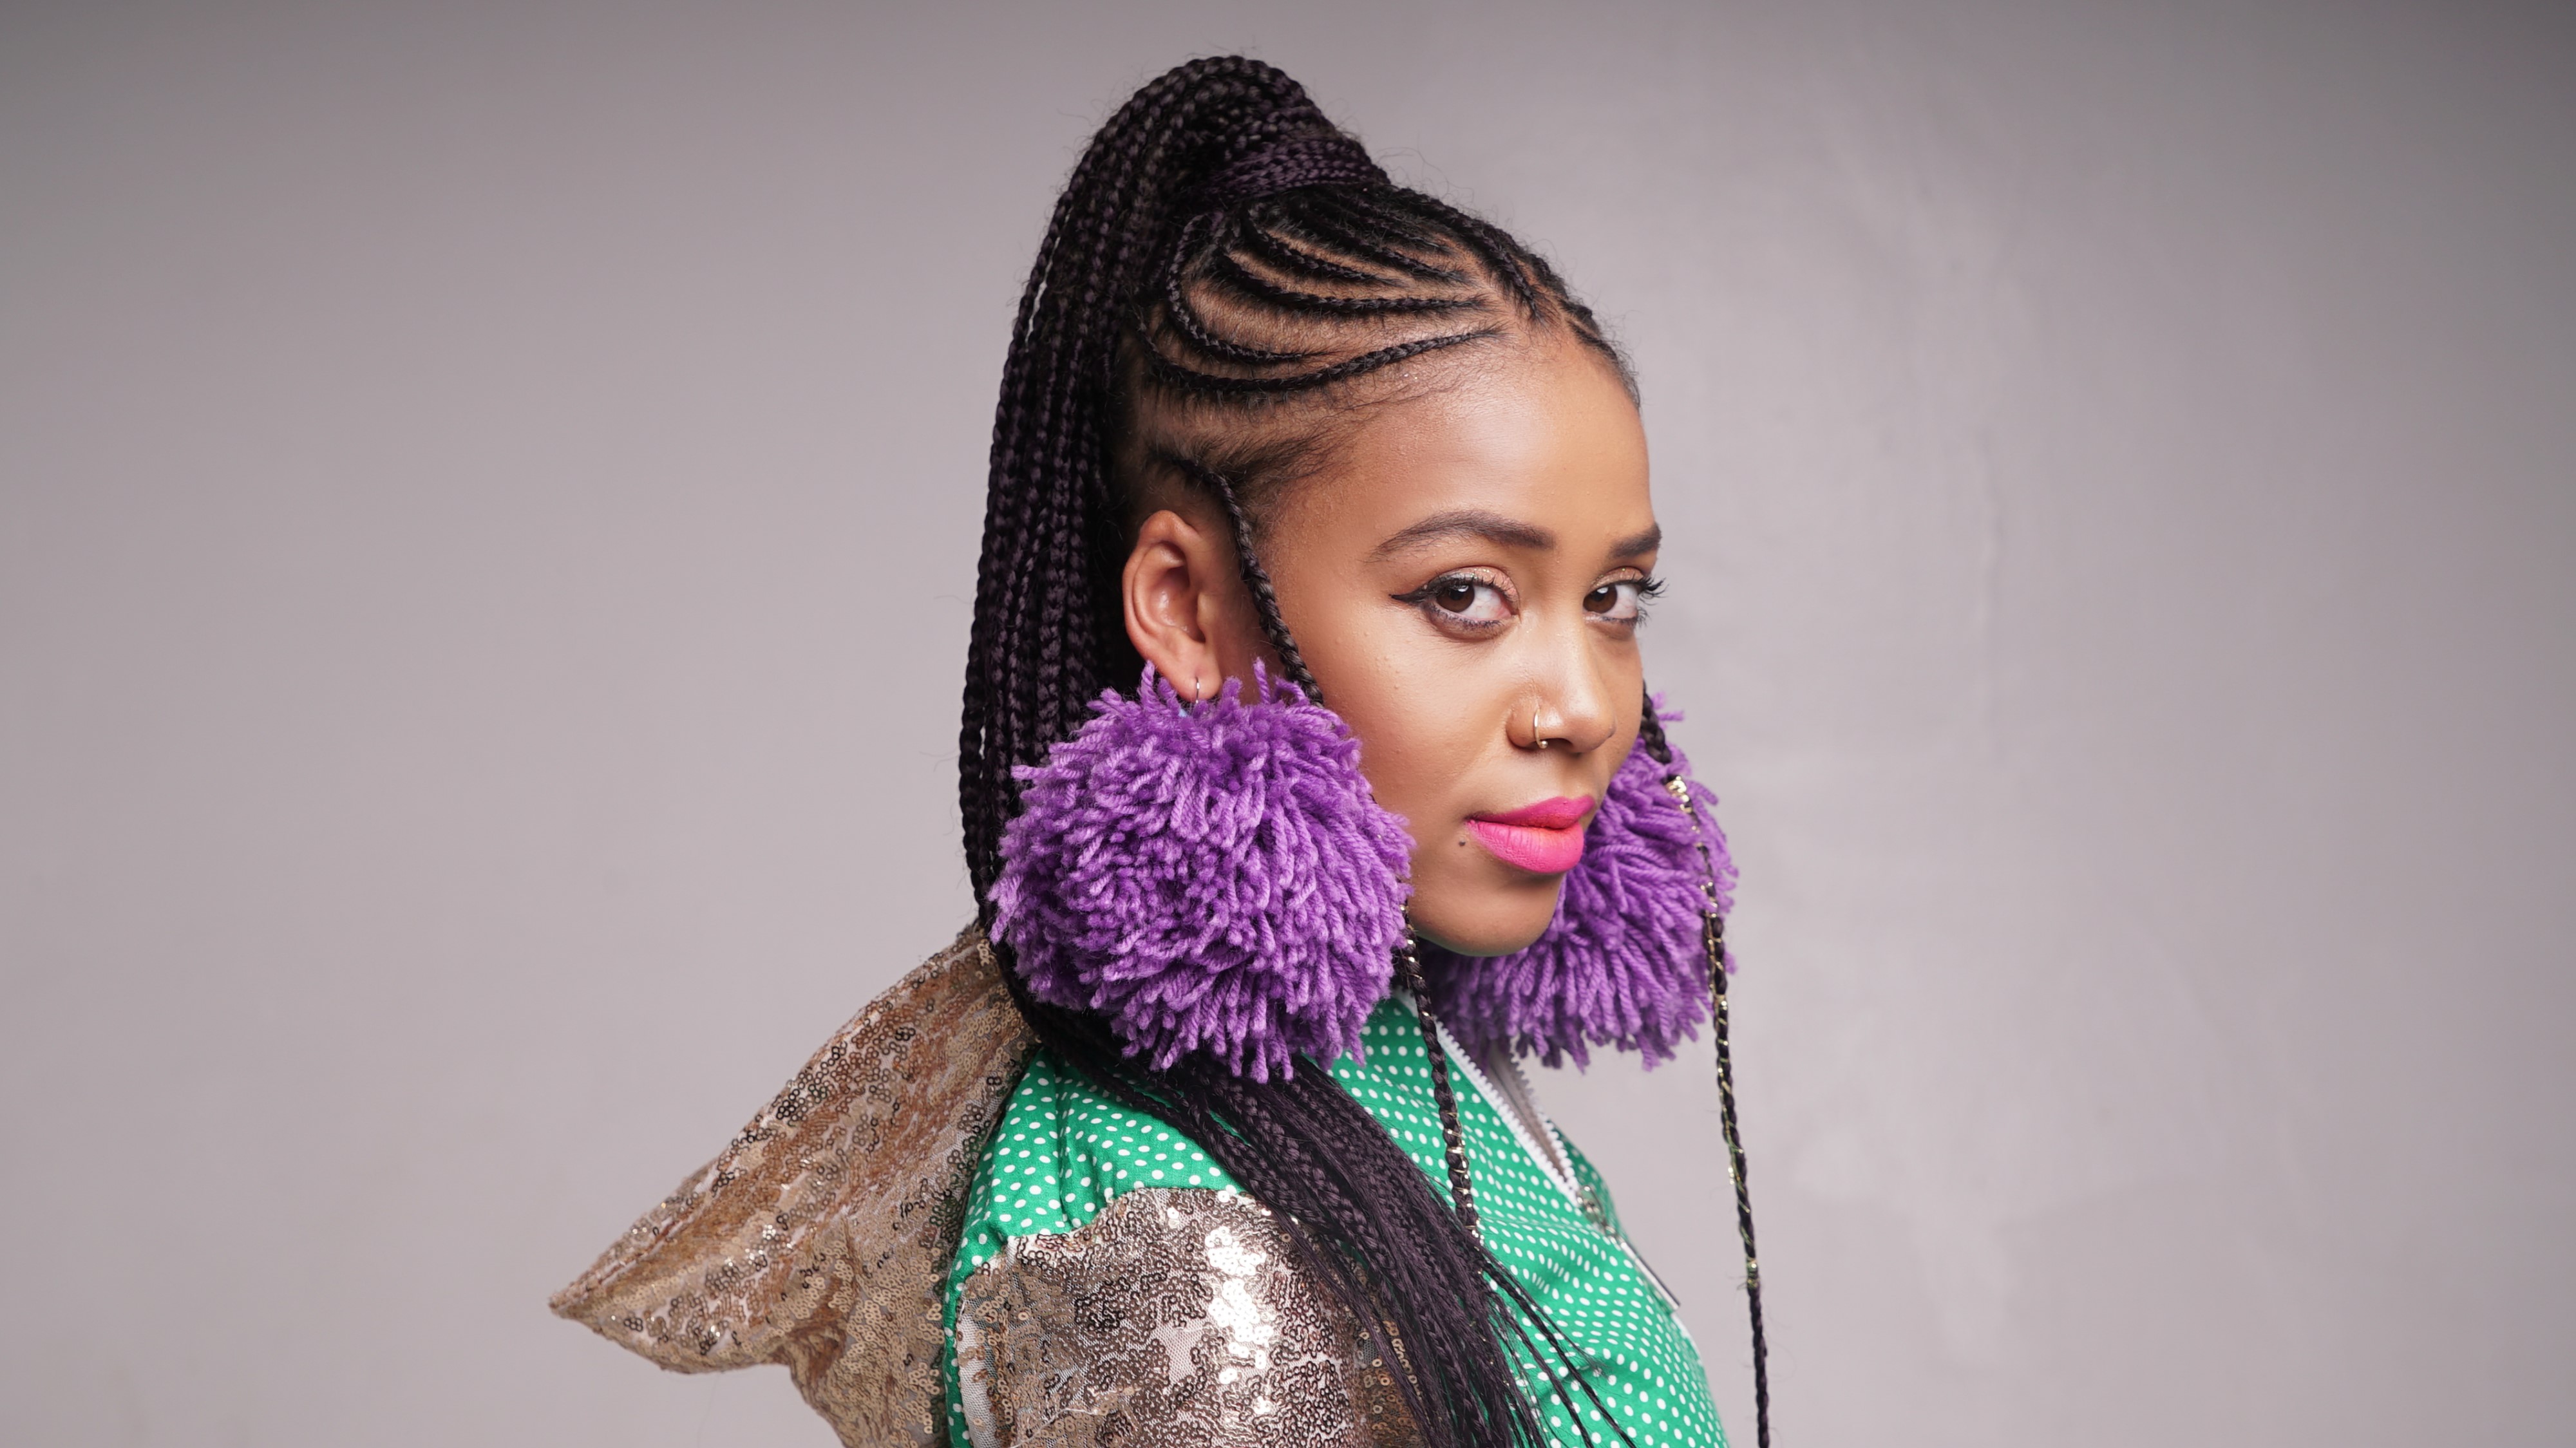 5 minutes with Sho Madjozi